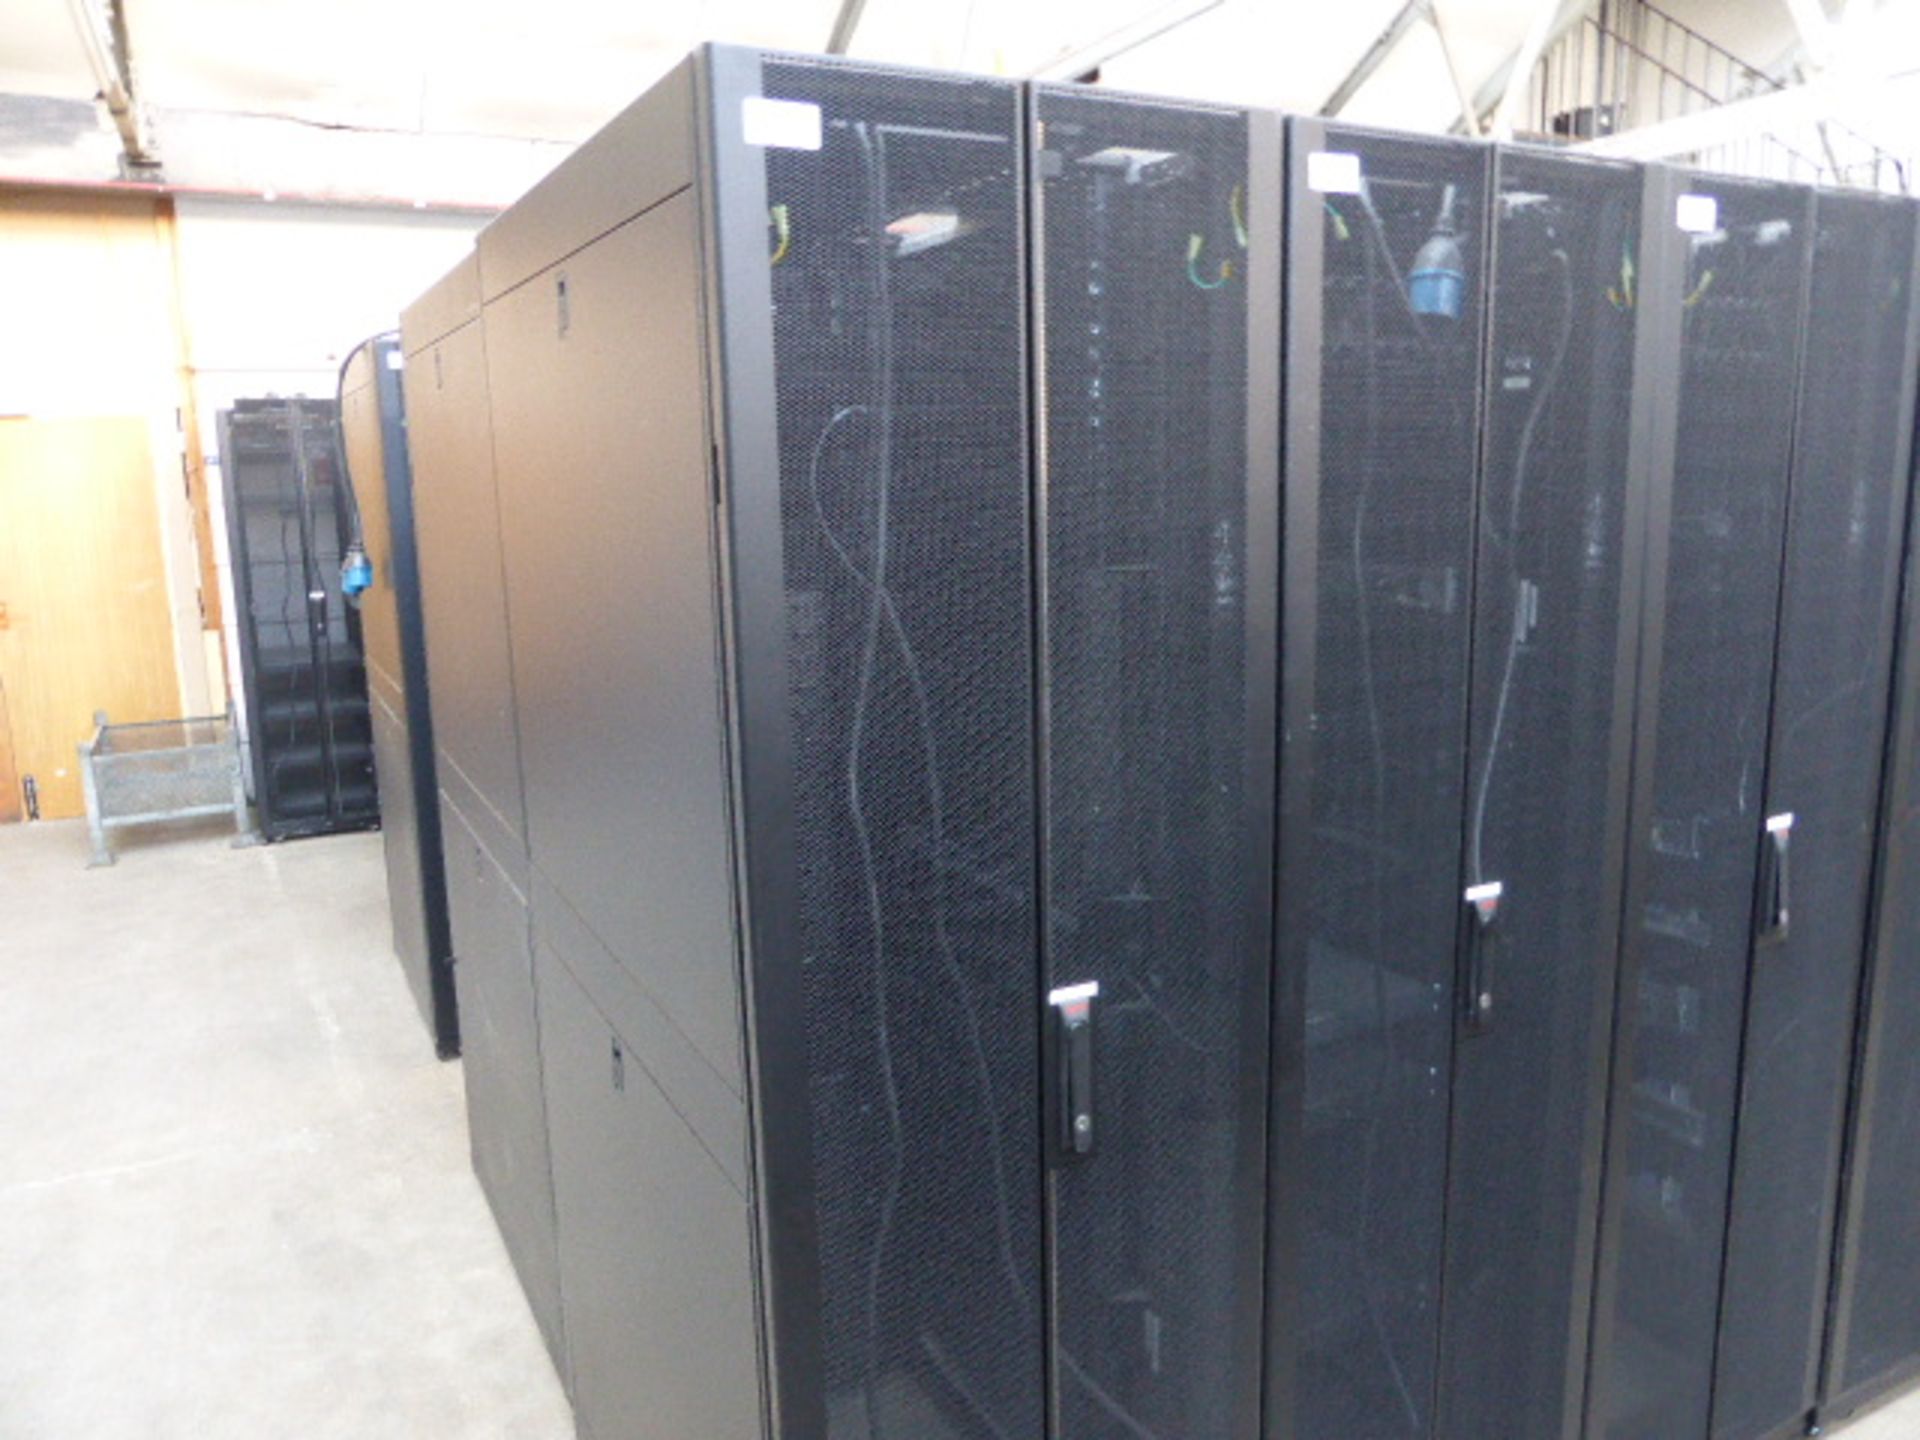 APC server cabinet on castors 60cm wide with 2 APC switch rack PDU units each with 24 outputs on - Image 2 of 3